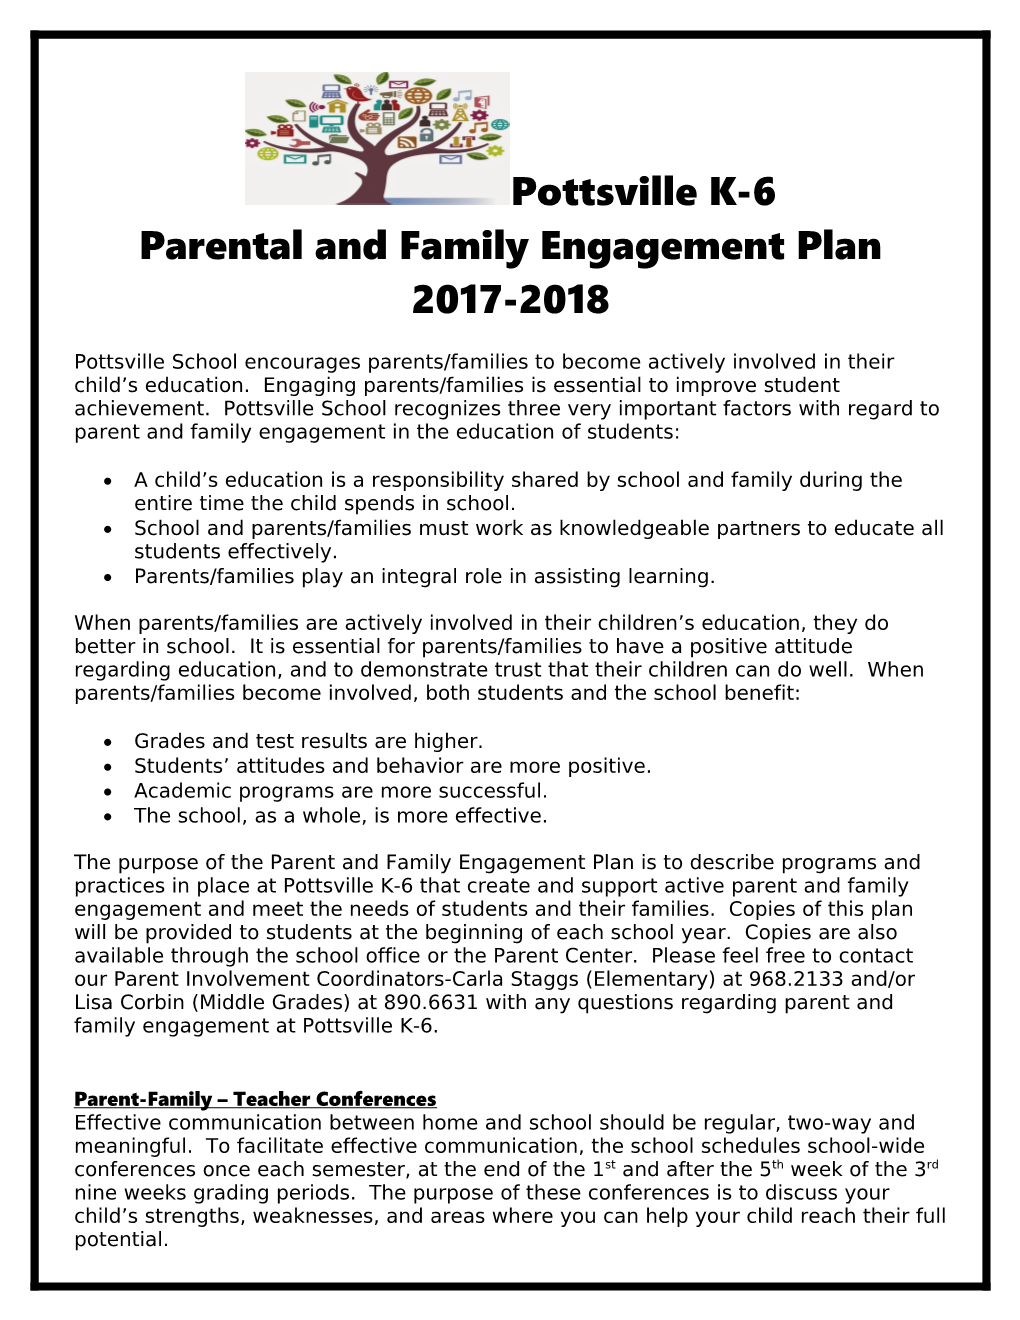 Parental and Family Engagement Plan